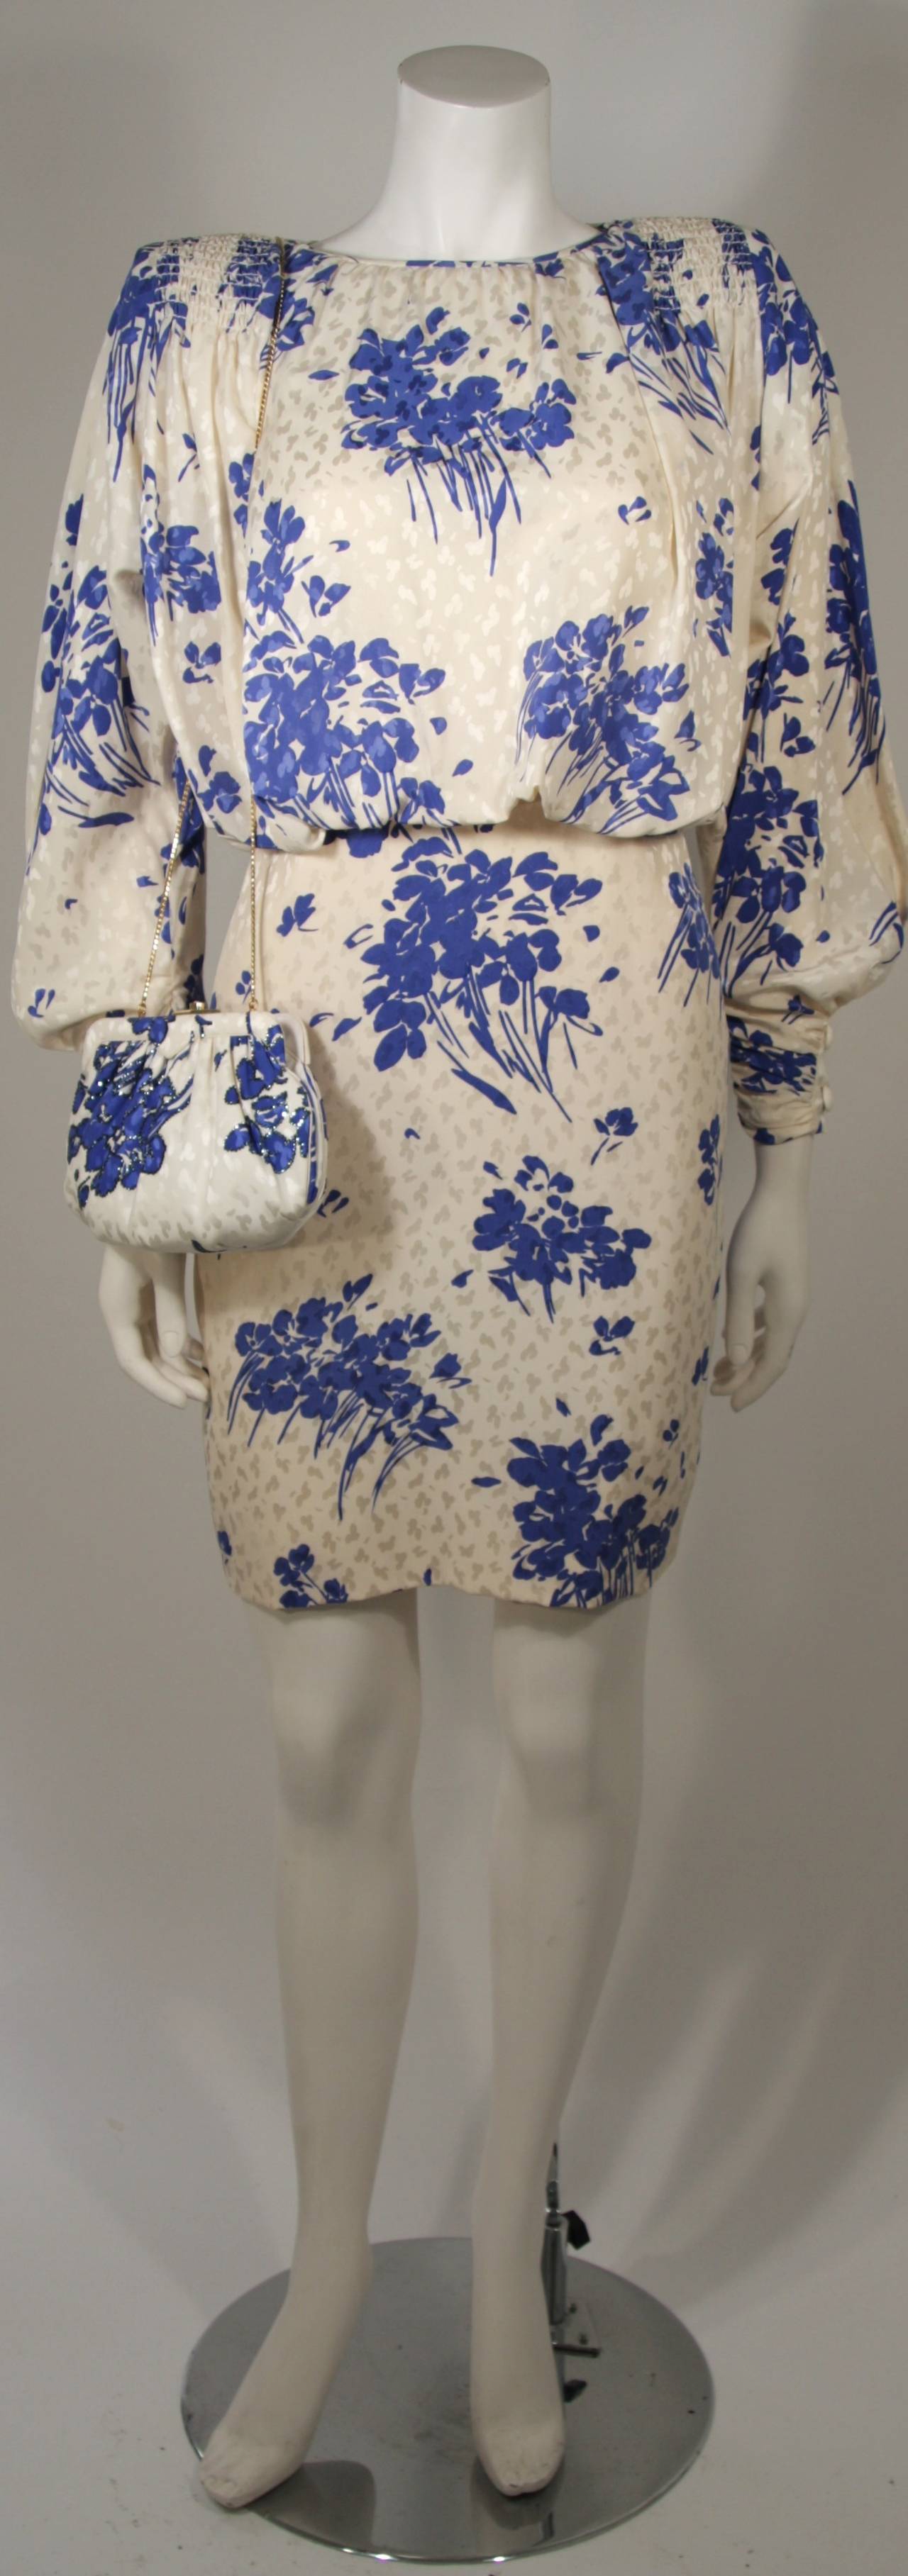 This  Galanos dress with the matching Judith Leiber purse is available for viewing at our Beverly Hills Boutique. The dress is fashioned out of a patterned silk and features smocking at the shoulders and back. There is a center back zipper closure.